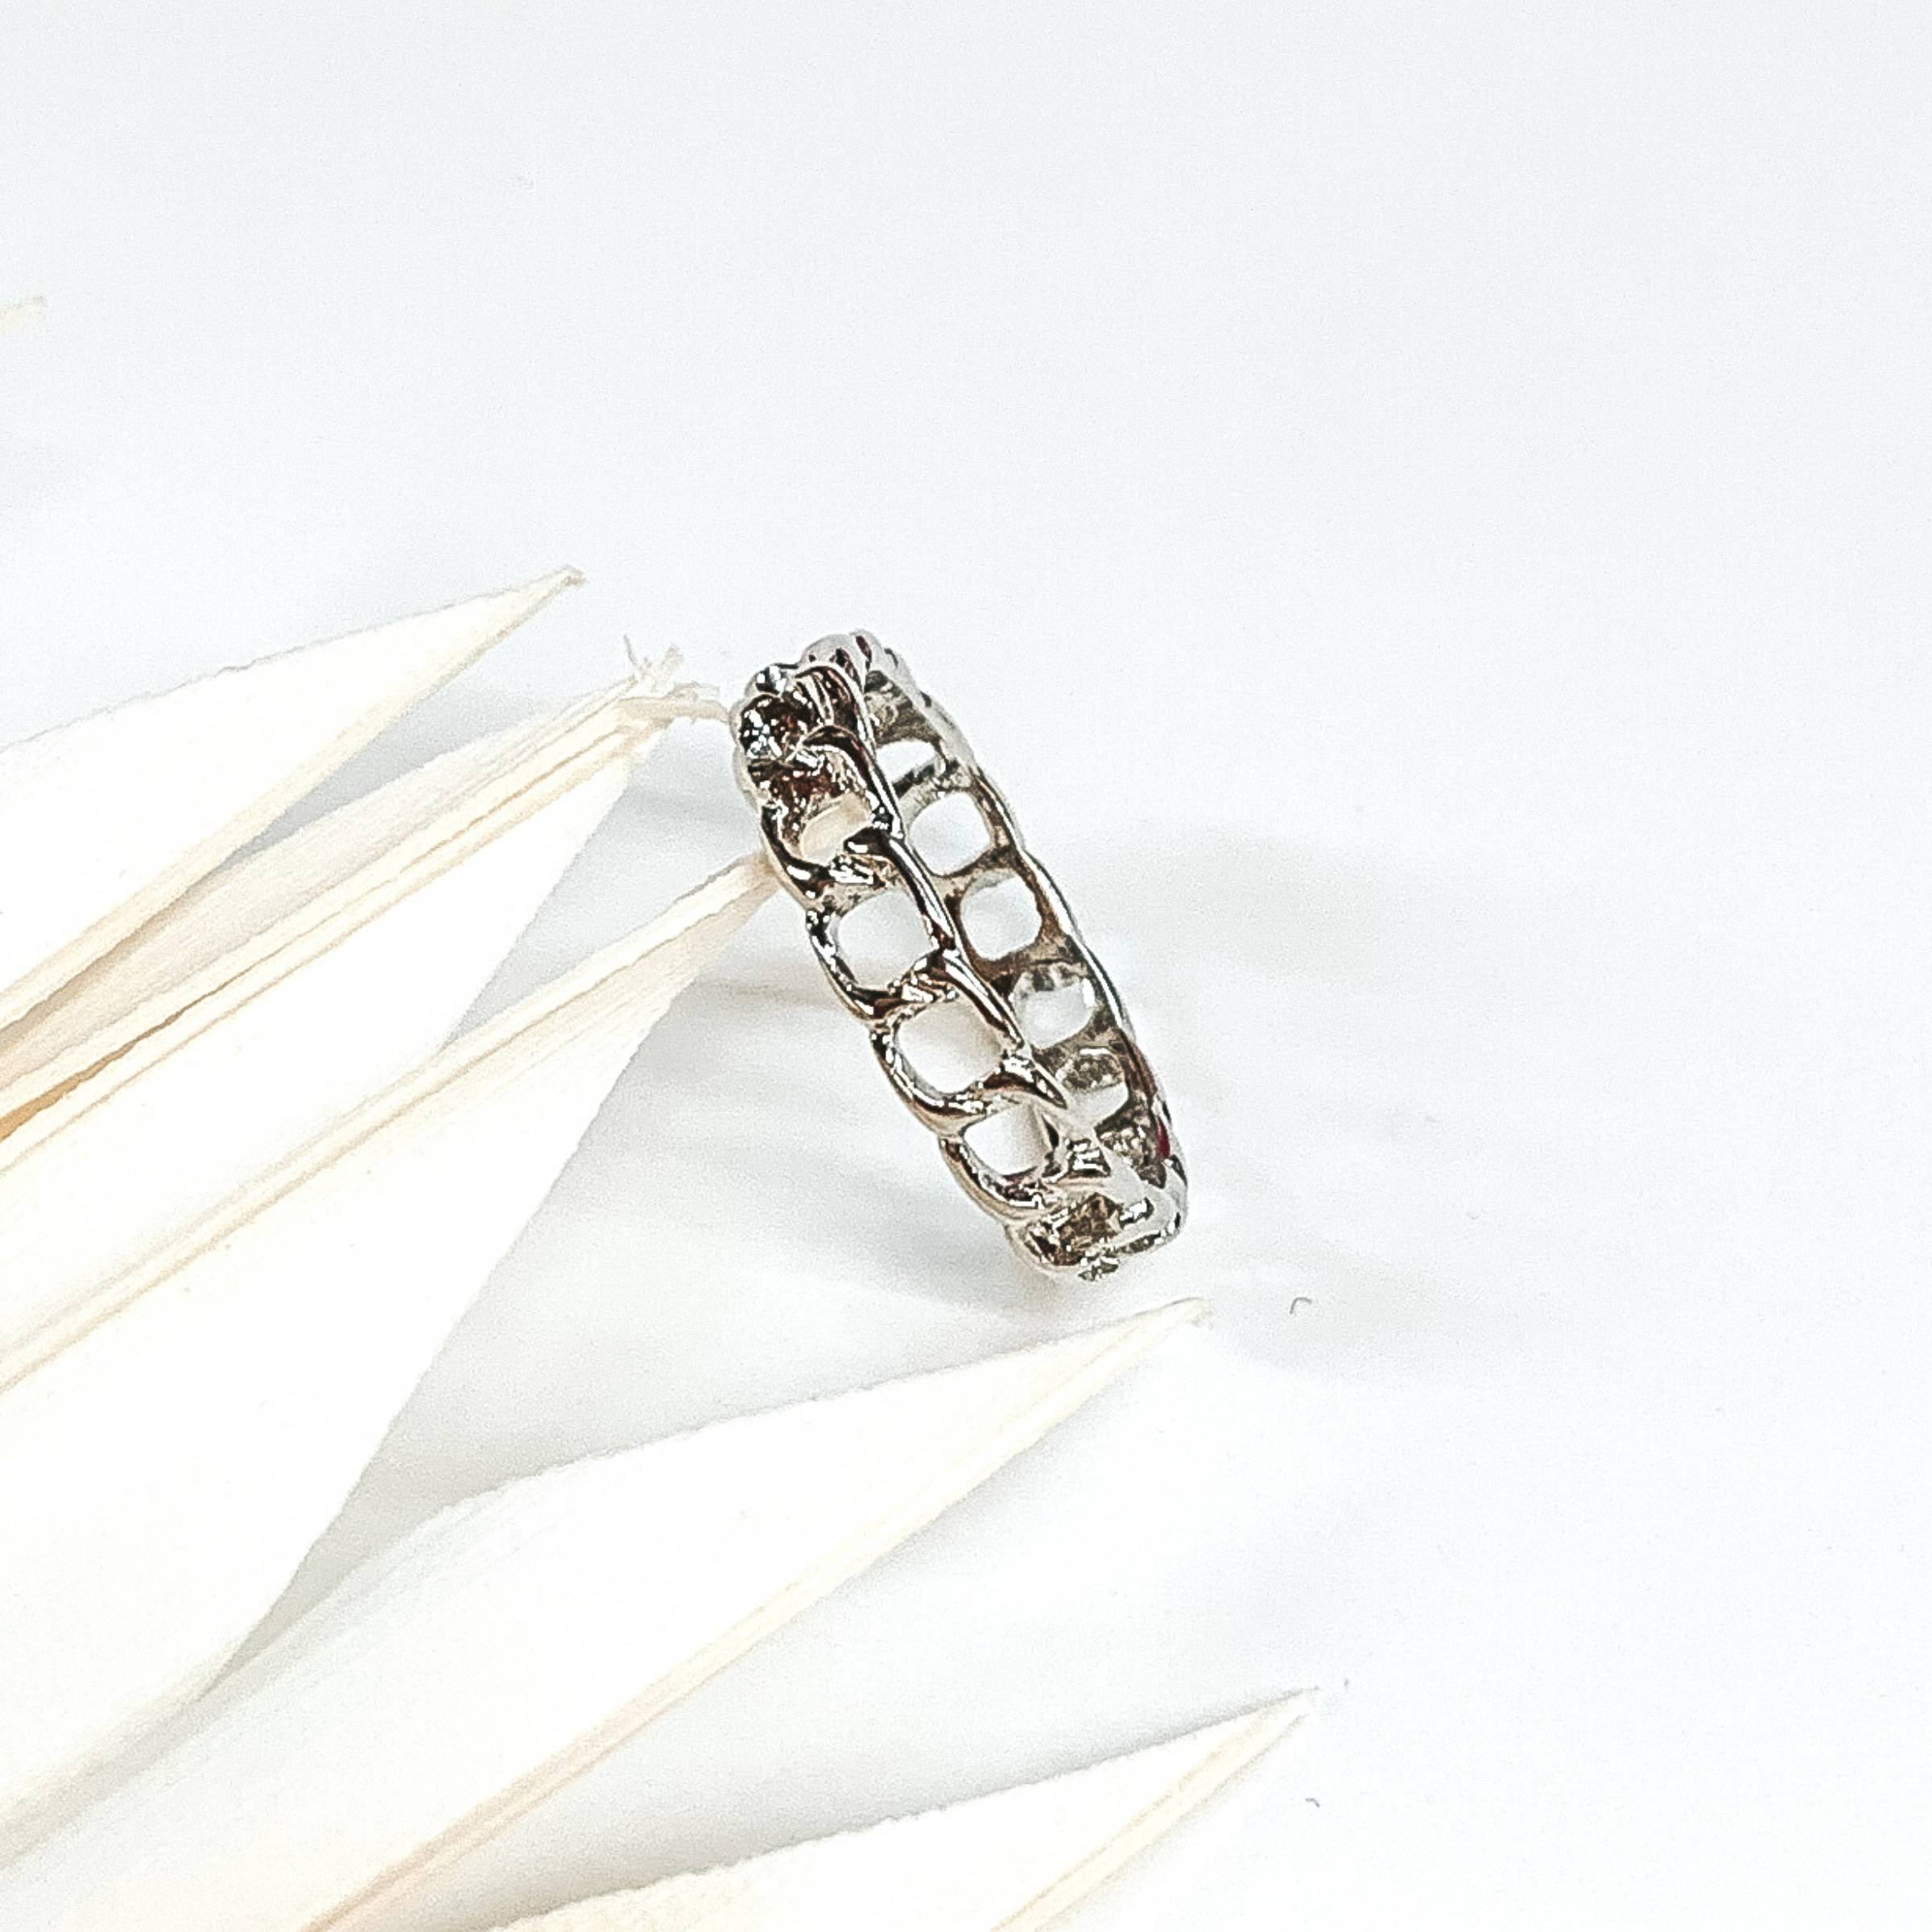 This is a silver chain link ring. this ring is on a white background with some white leaves on the left side of the picture. 